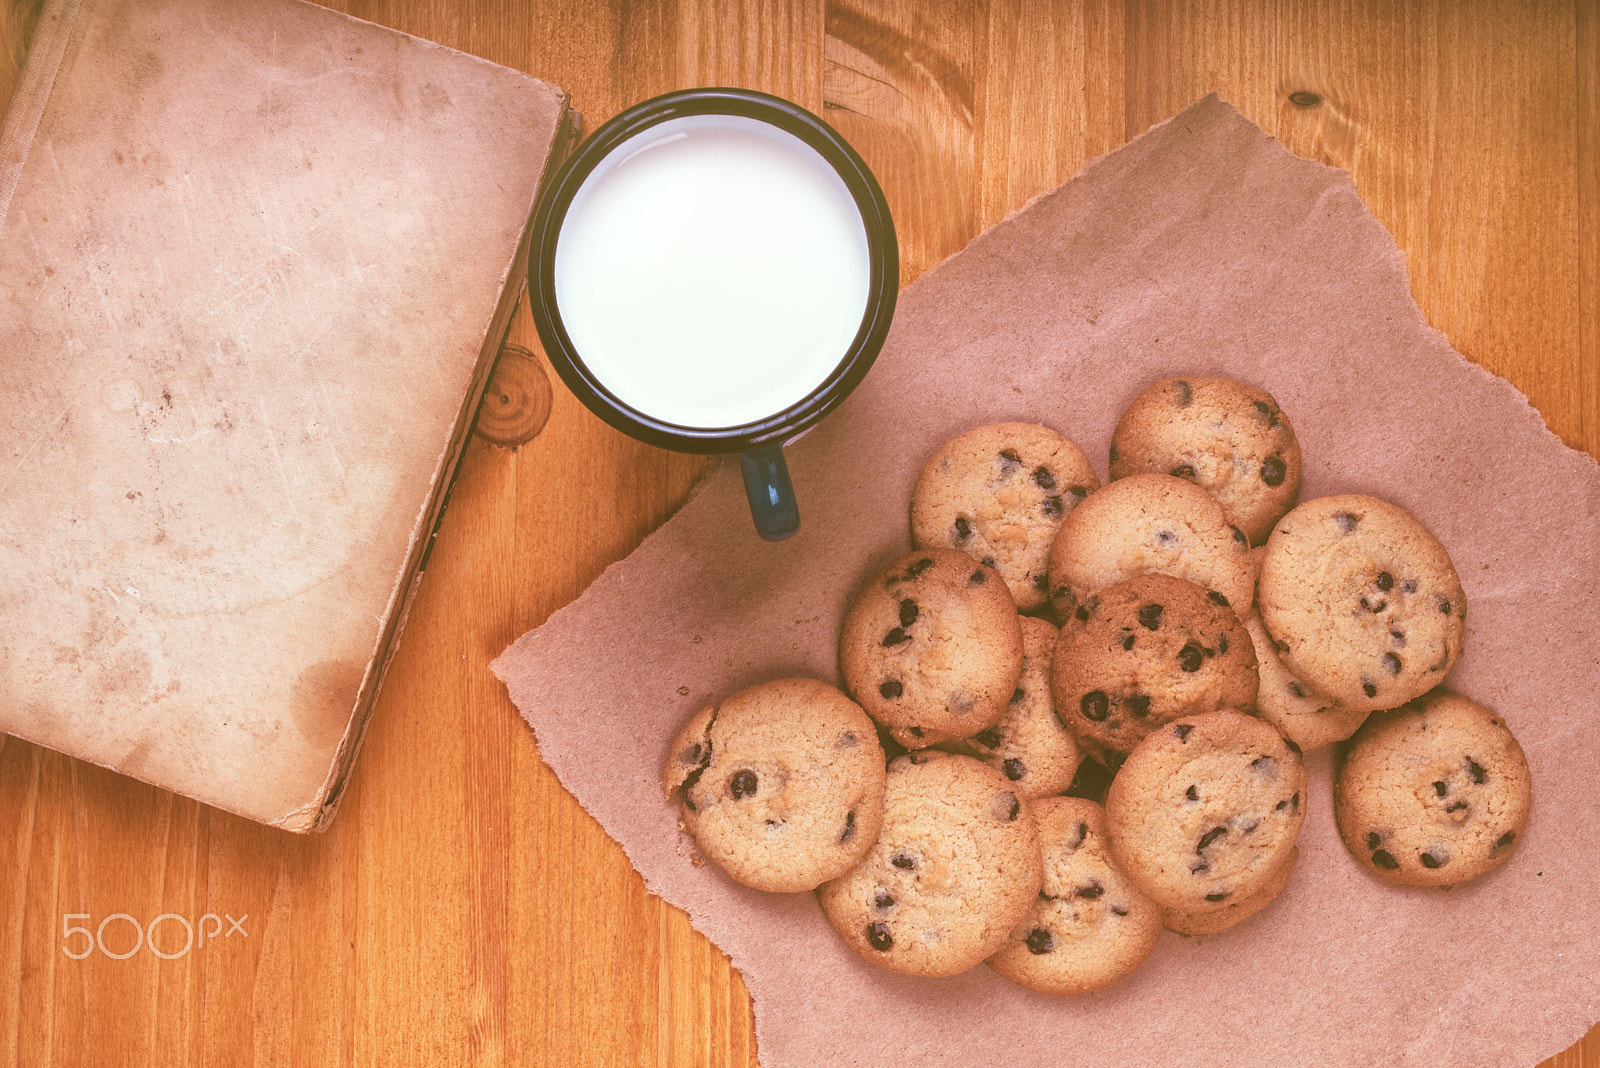 Nikon D600 sample photo. Homemade chocolate chip cookies, milk cup and vintage book photography